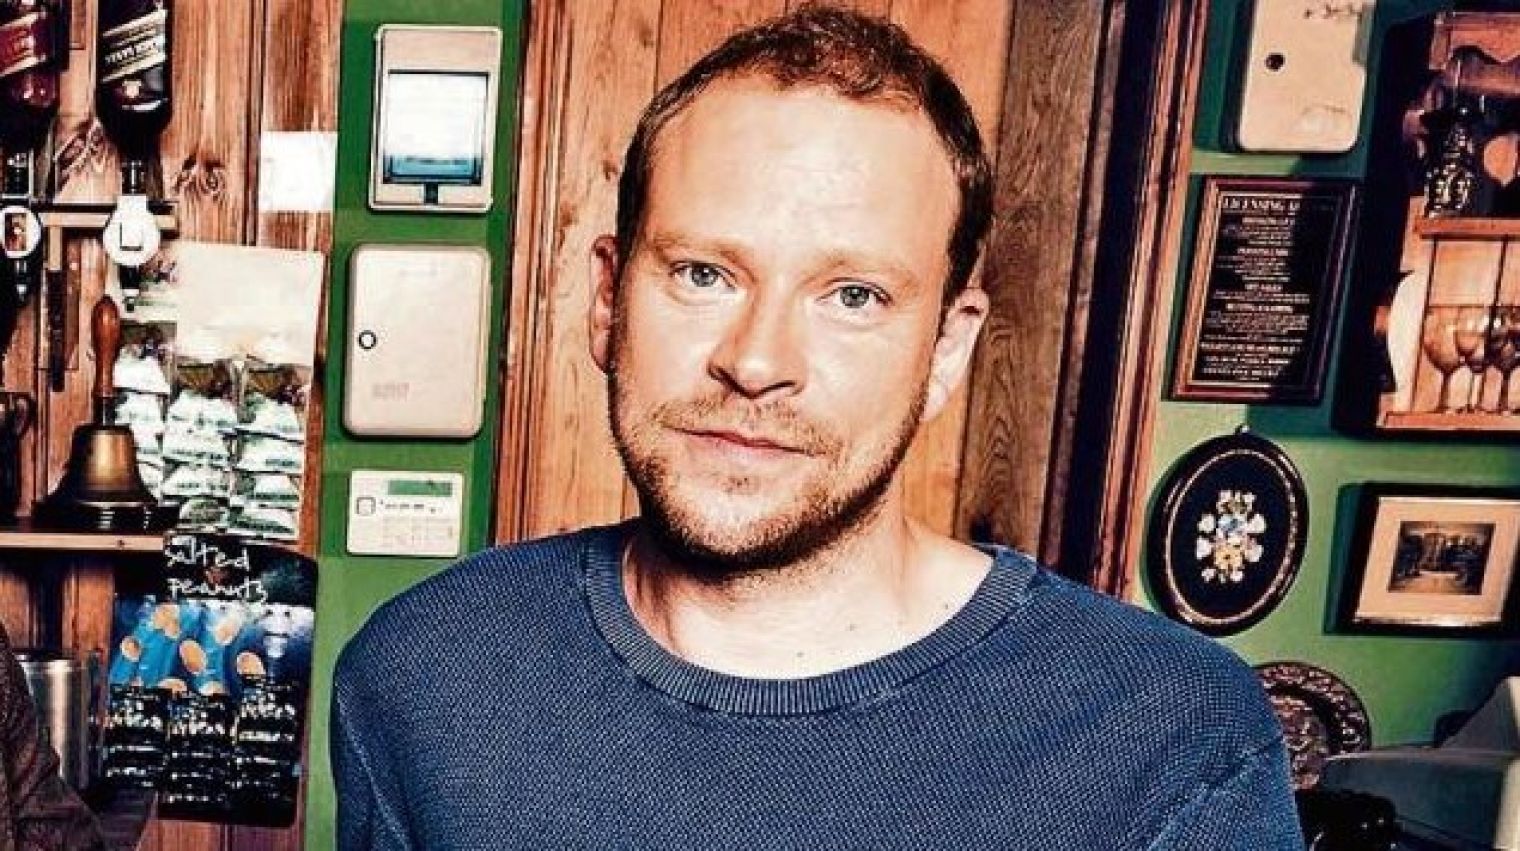 Robert Webb has been nominated for Channel 4's inaugural National Comedy Awards for his role as wannabe pub landlord Andrew in 'Back'. 